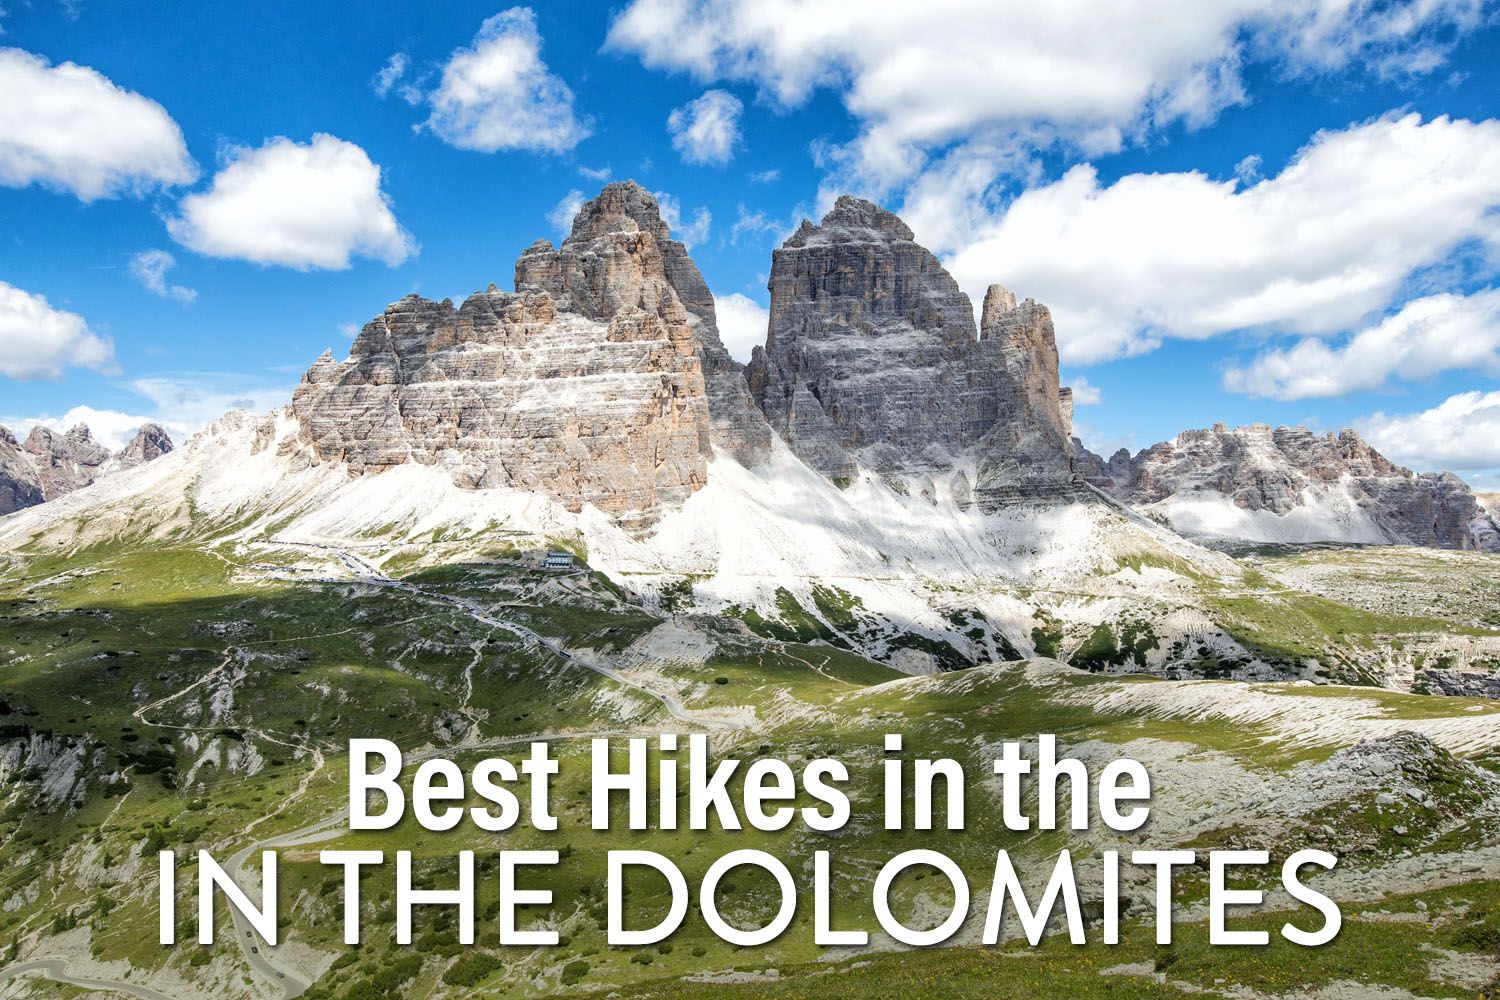 Hikes in the Dolomites